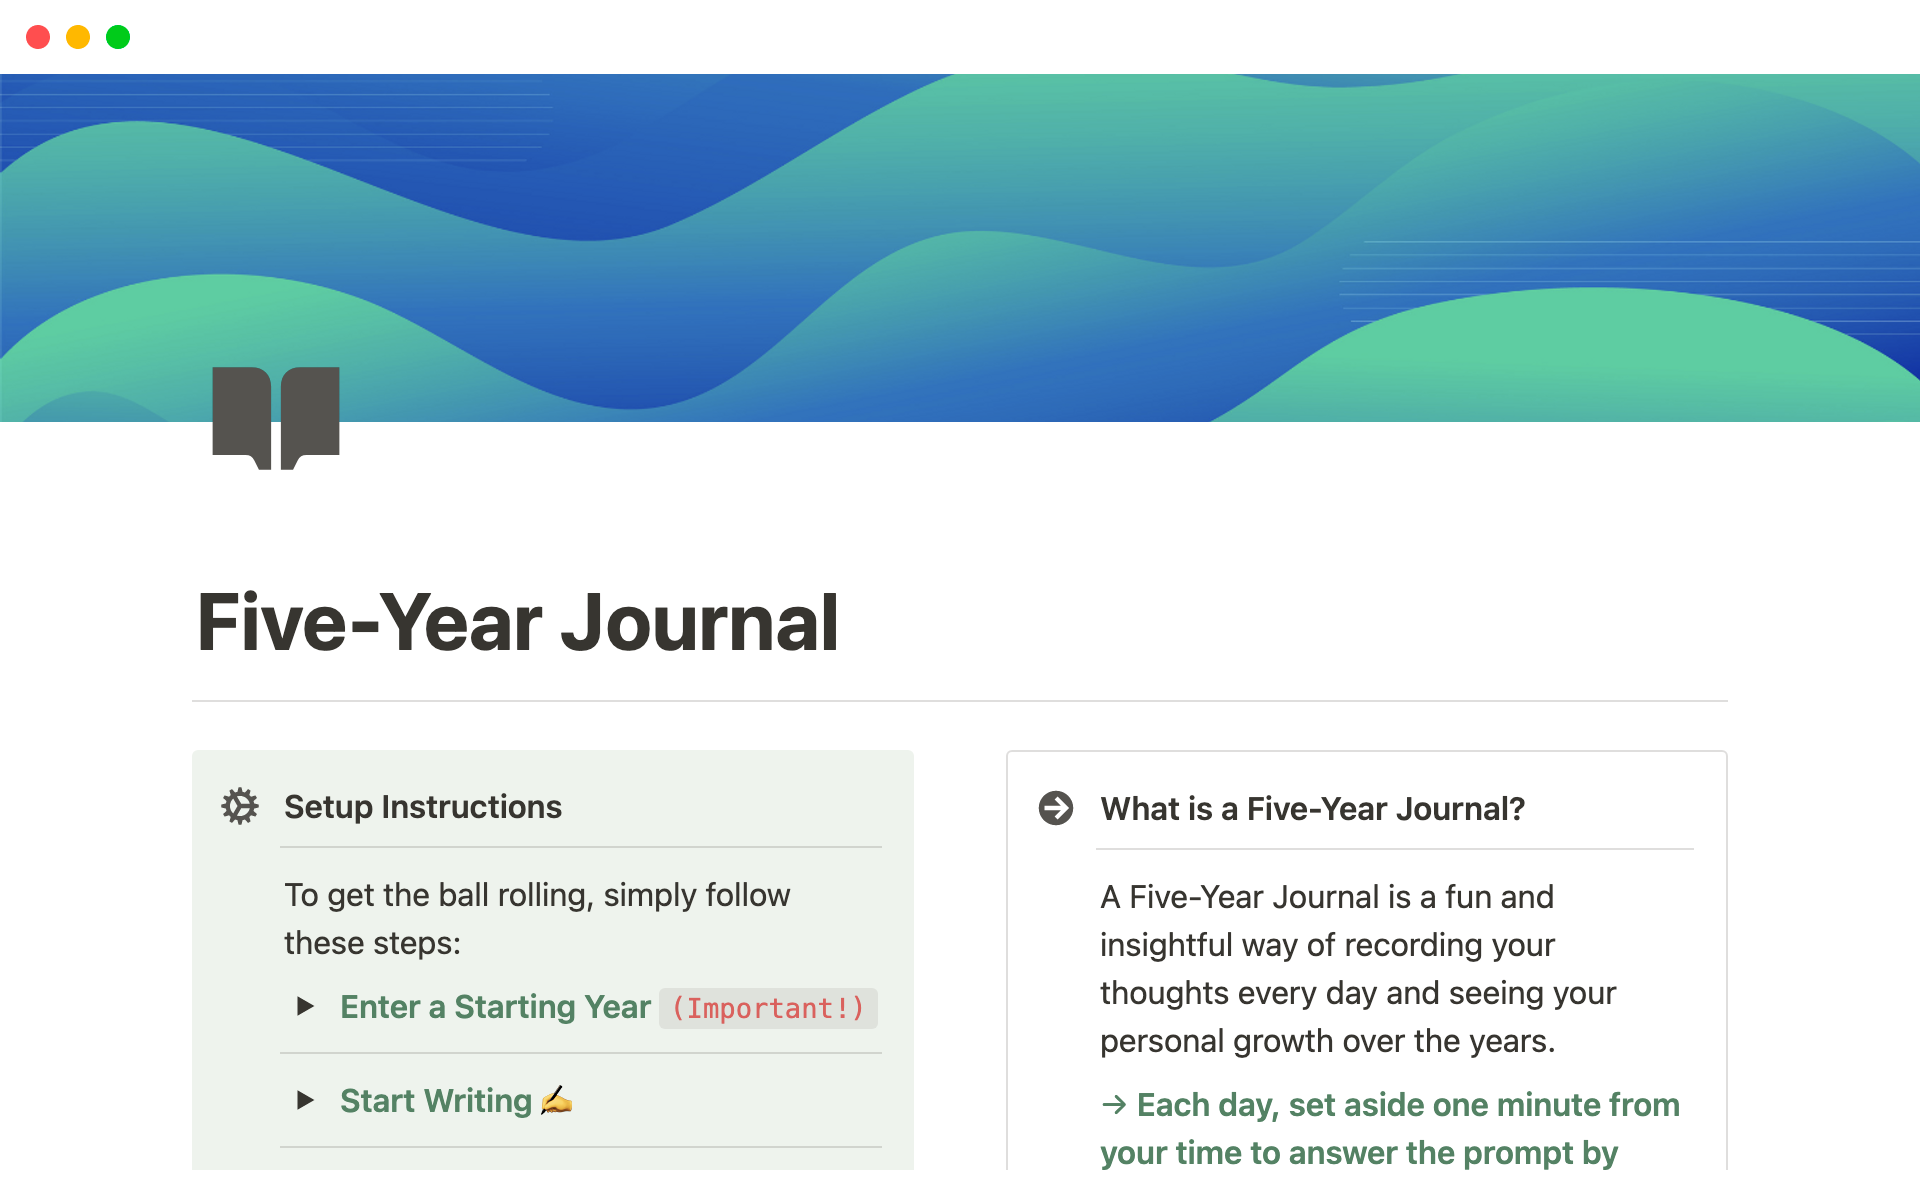 Write one line of journal entry per day every year and see how you've grown by seeing what you've written from the past five years